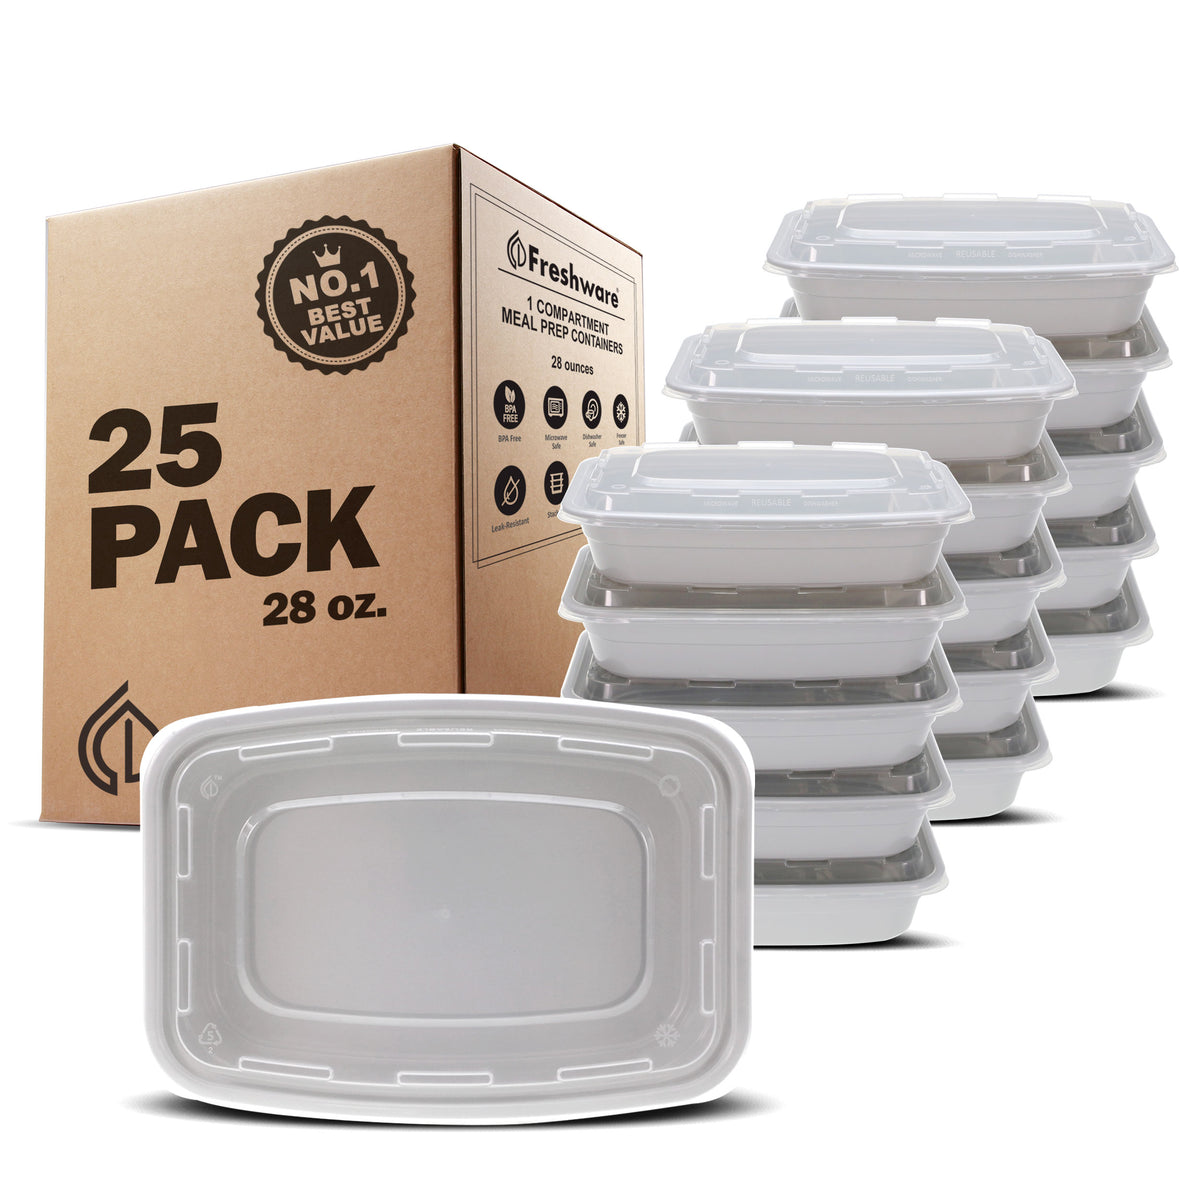 50 Packs Meal Prep Containers 32oz, Plastic Food Prep Containers with Lids,  Leakproof To Go Containers with Lids Reusable Food Containers,  Microwave/Dishwasher/Freezer Safe